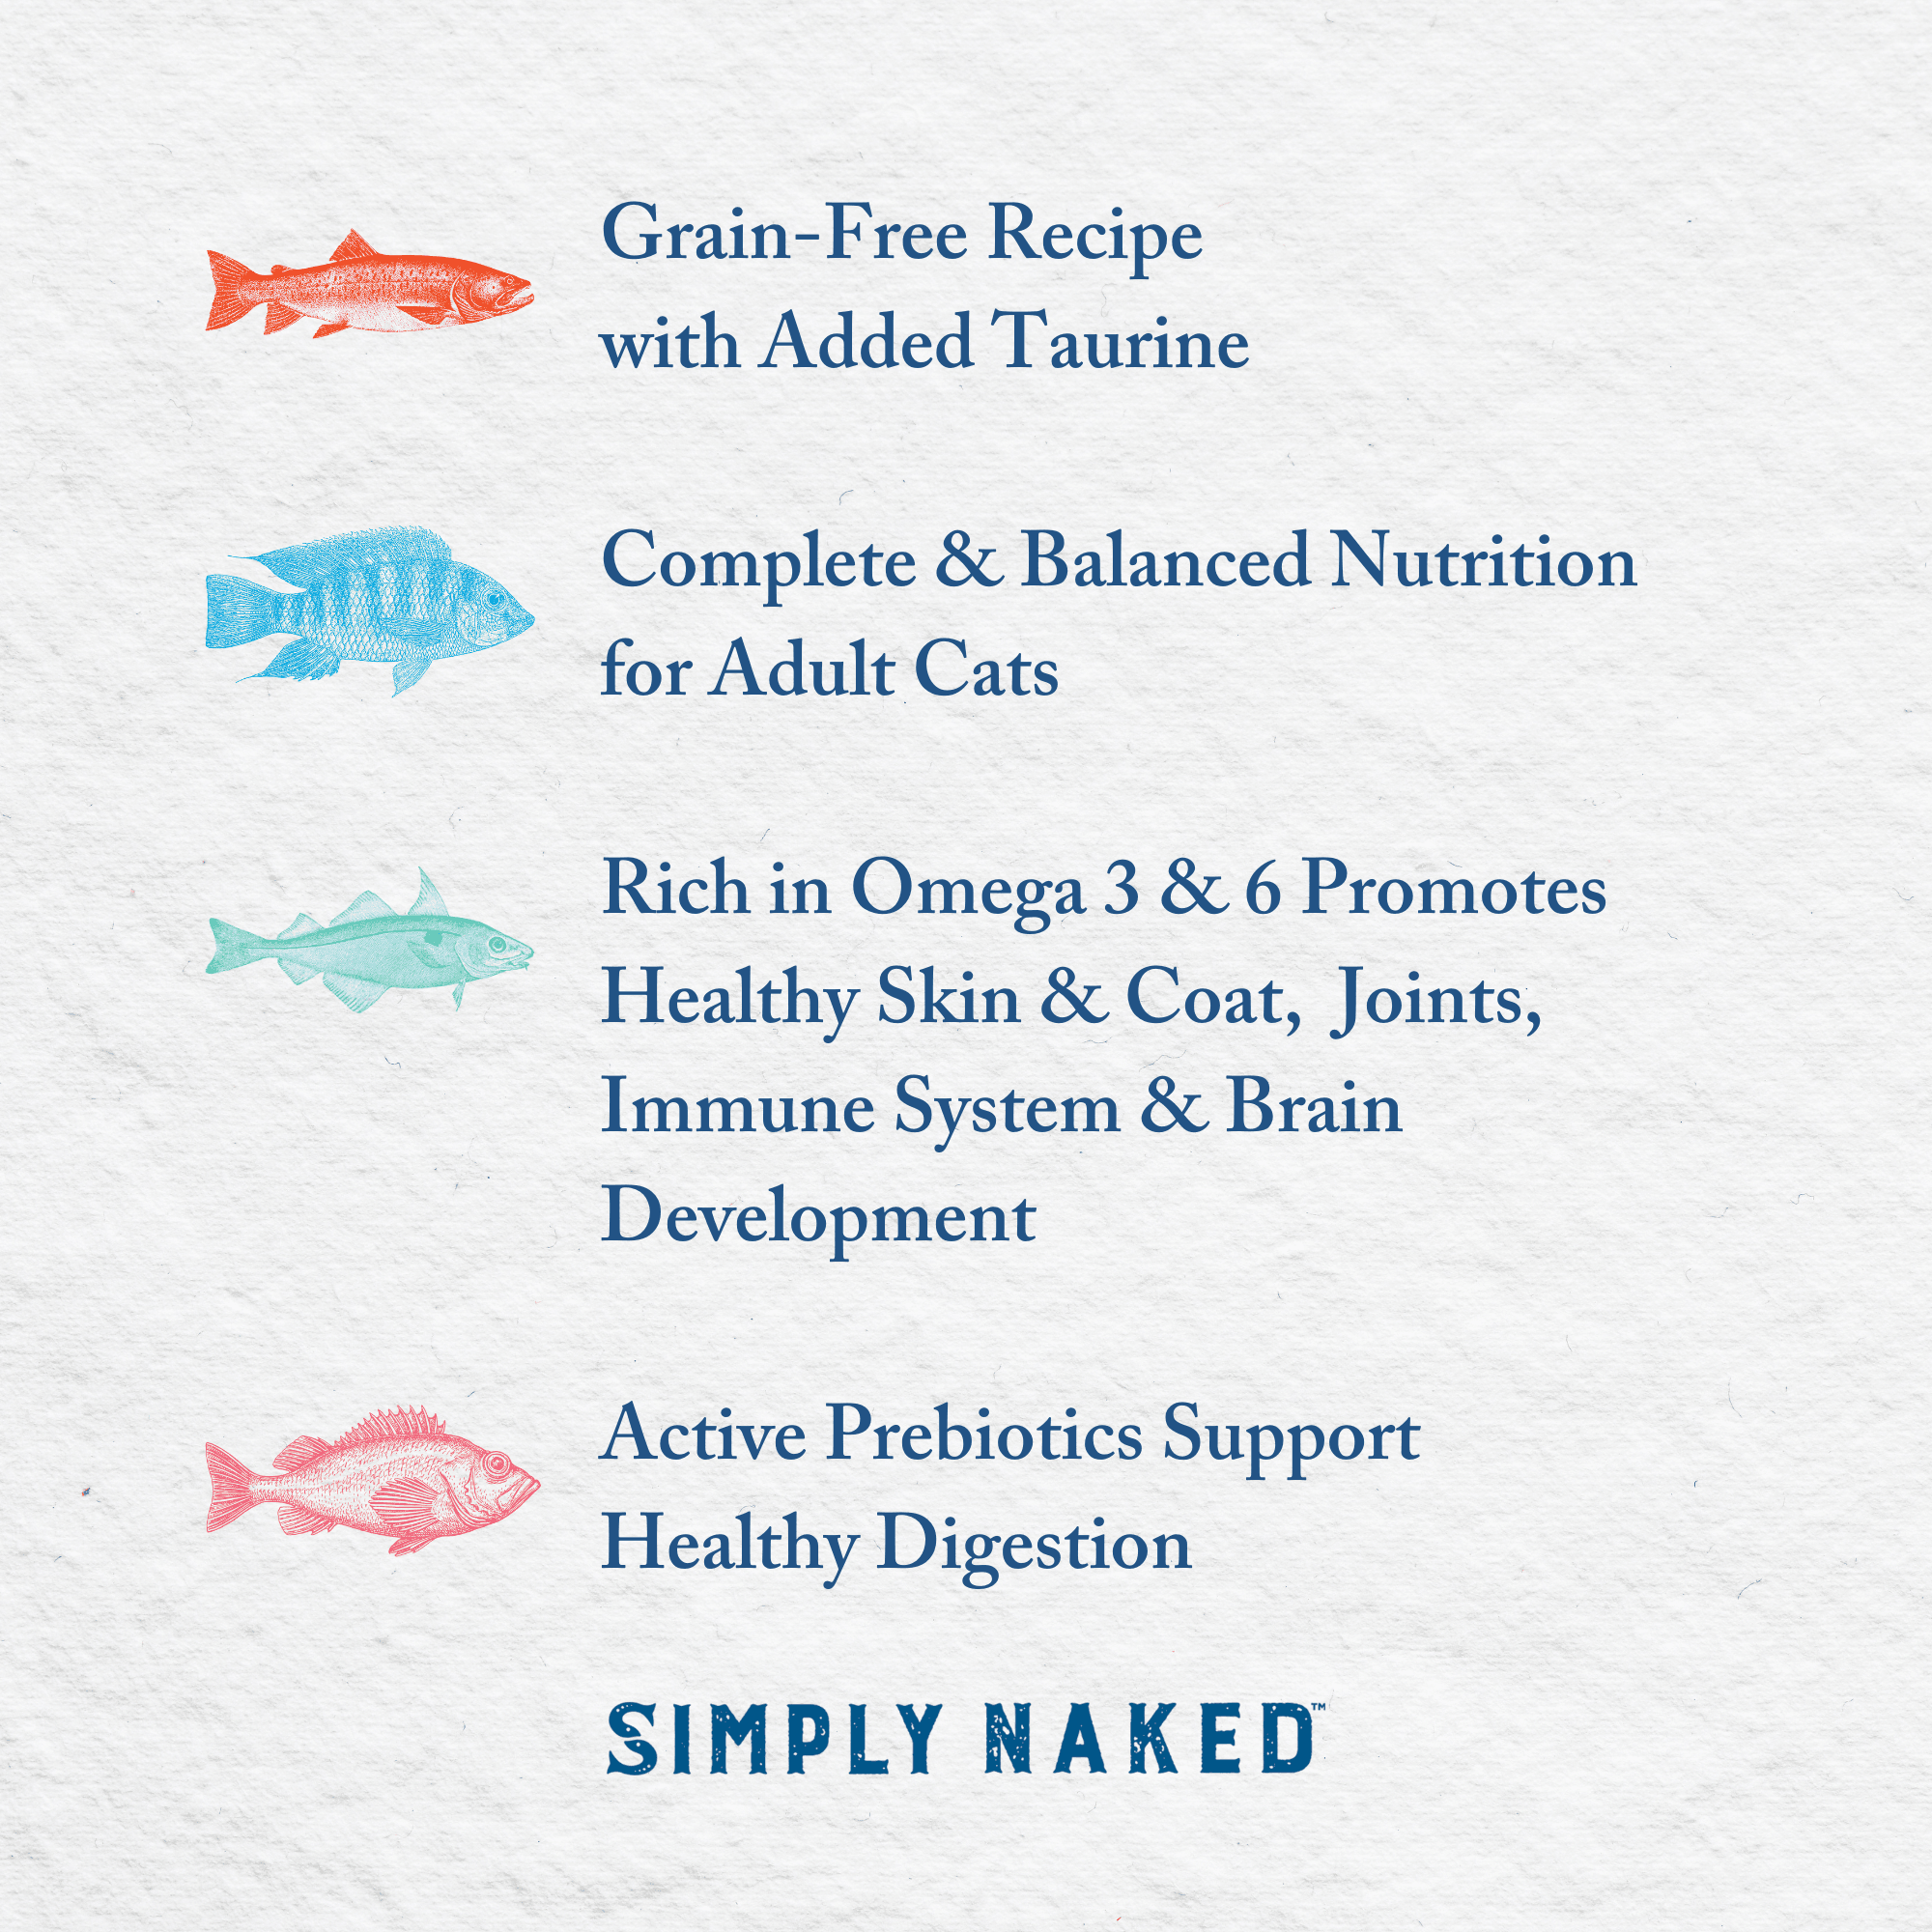 Wild Haddock & Cod Dinner for Cats - Simply Naked Fish Based Dog Food & Cat Food